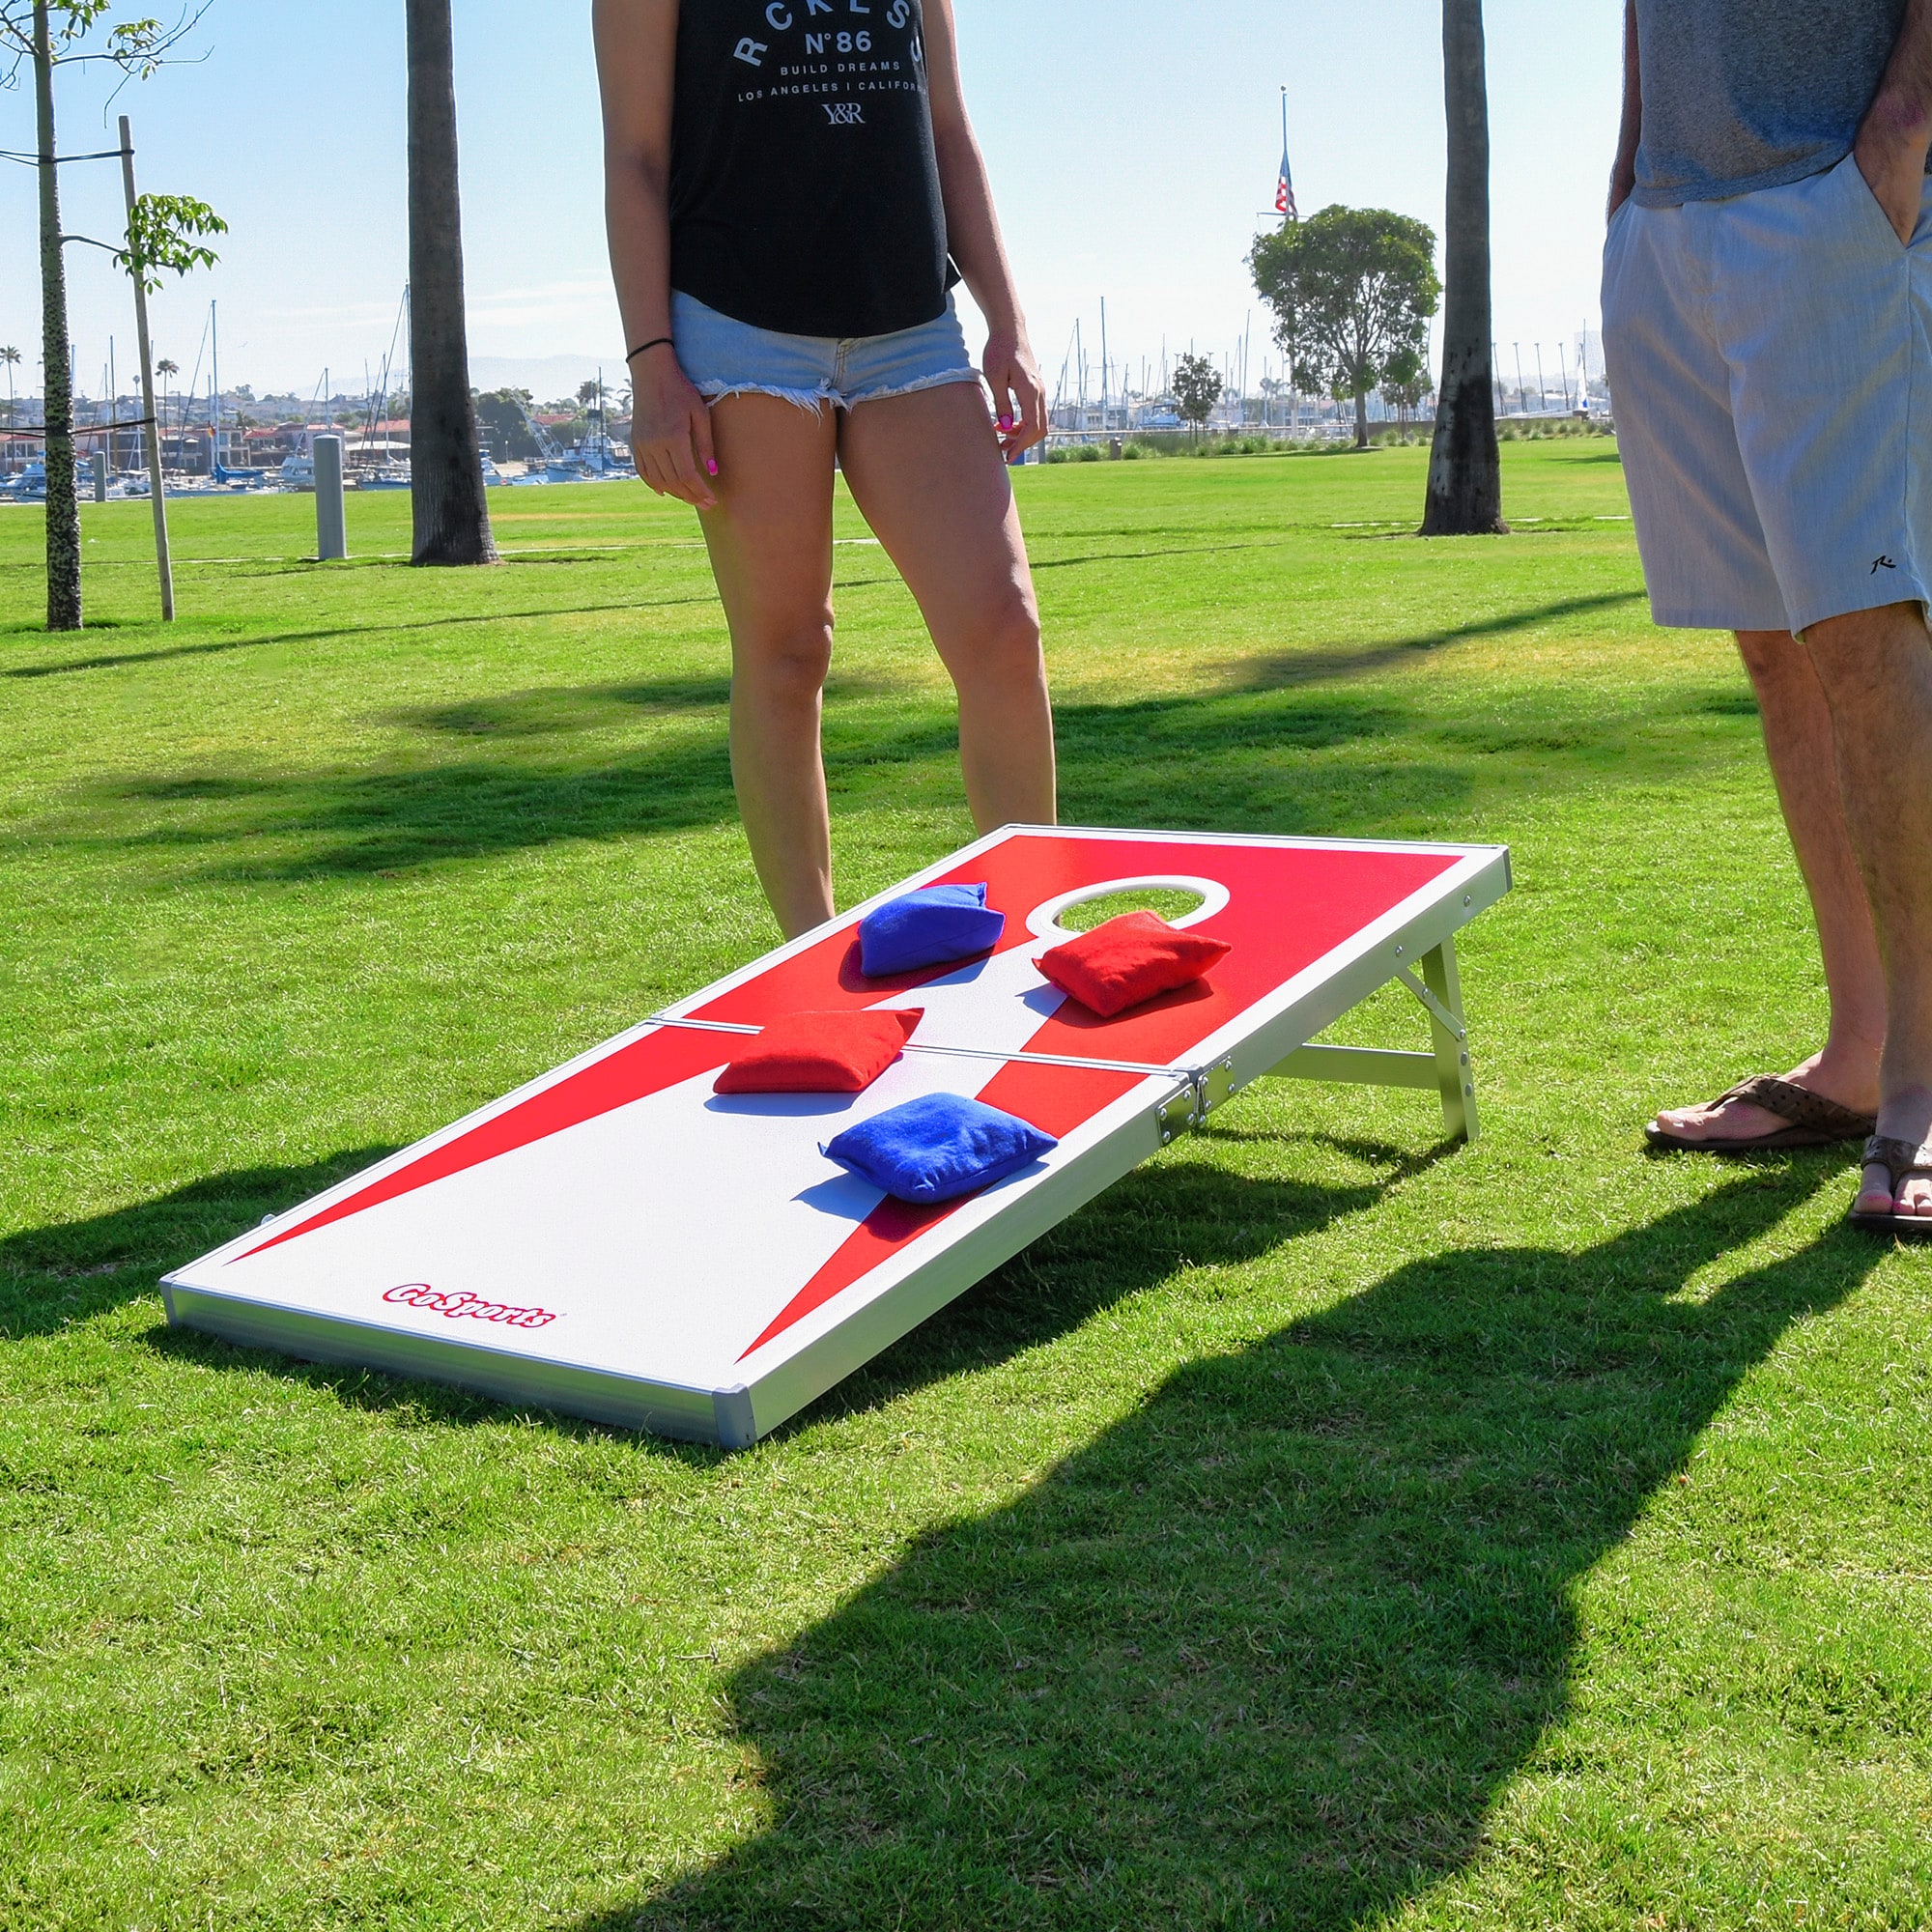 beach for parties yard game fun for all ages. lawn game Ring toss game cornhole home camping schools outdoor game cabin family